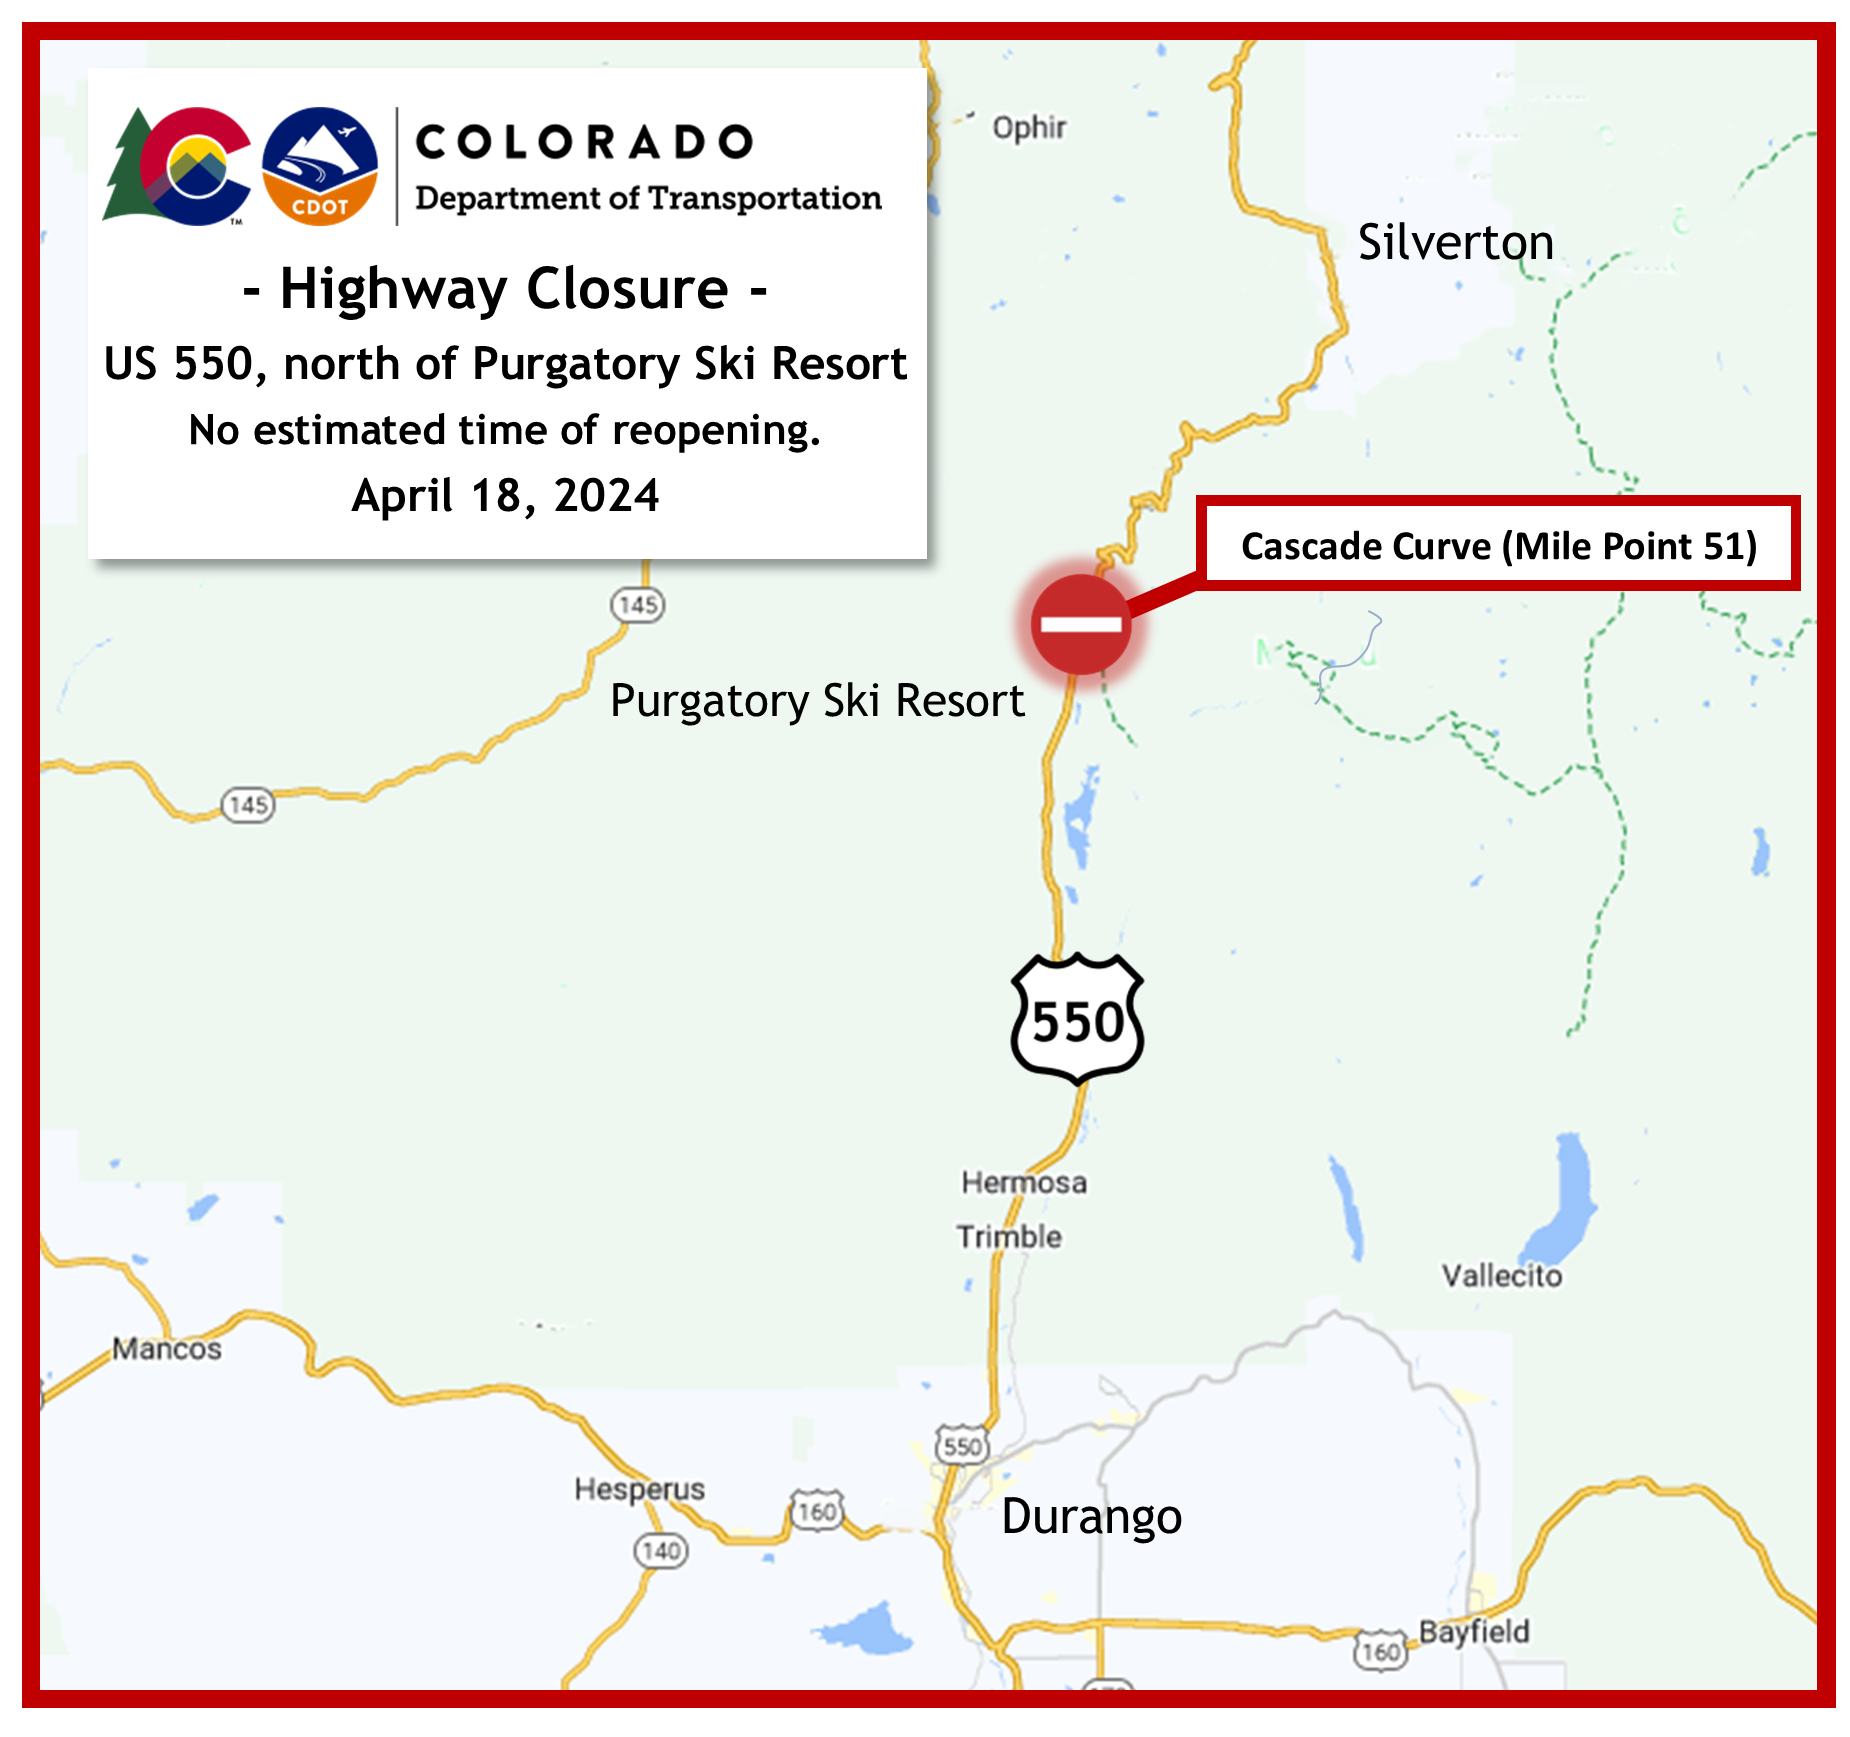 Highway Closure Map of scheduled closure on April 18 on US 550.png detail image